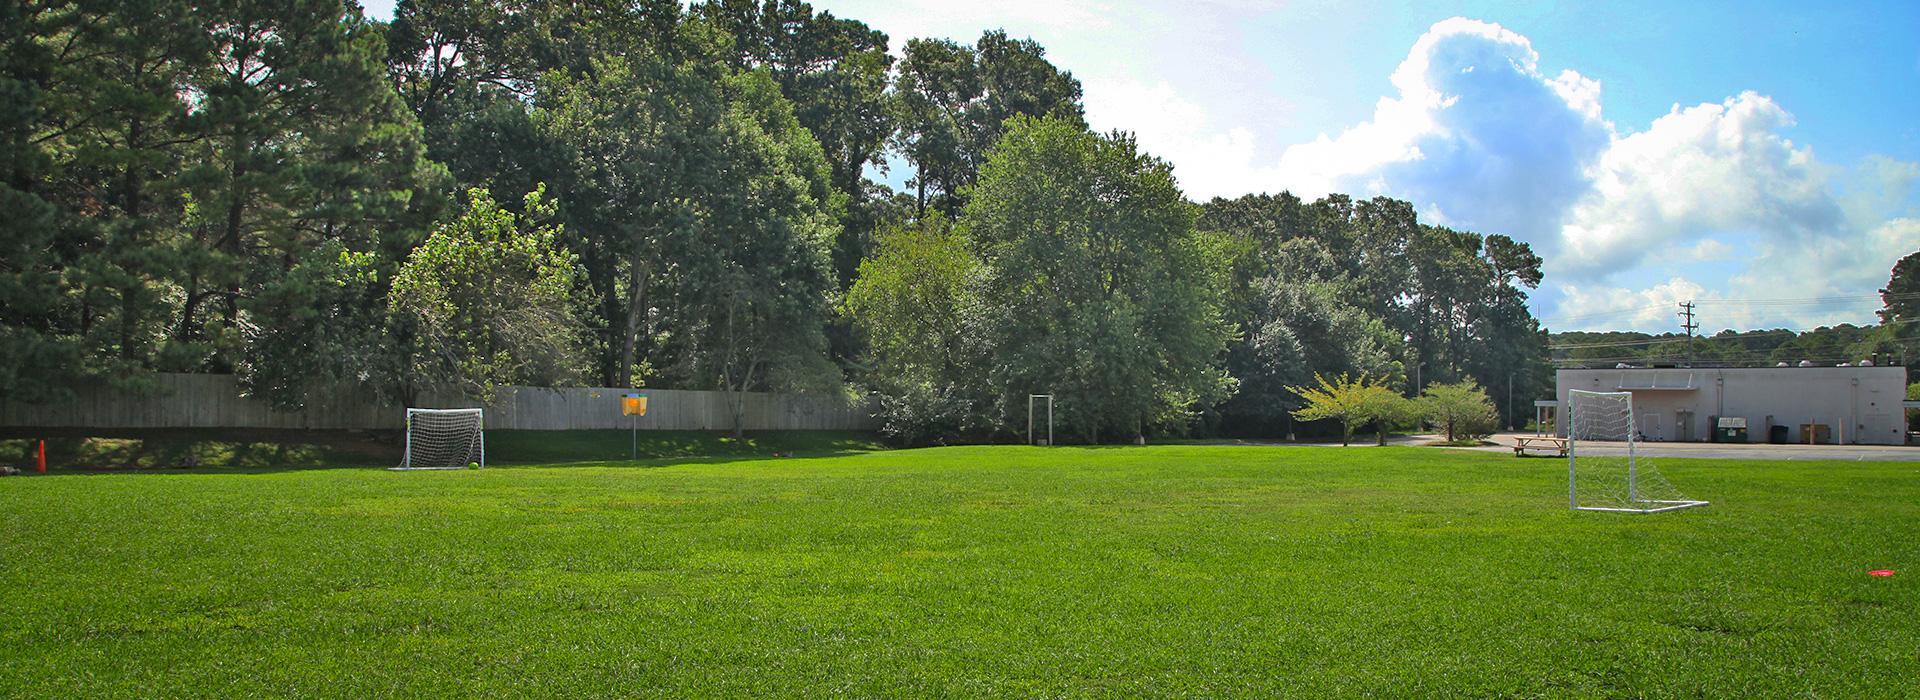 Outdoor sports field at a the Hilltop Family YMCA